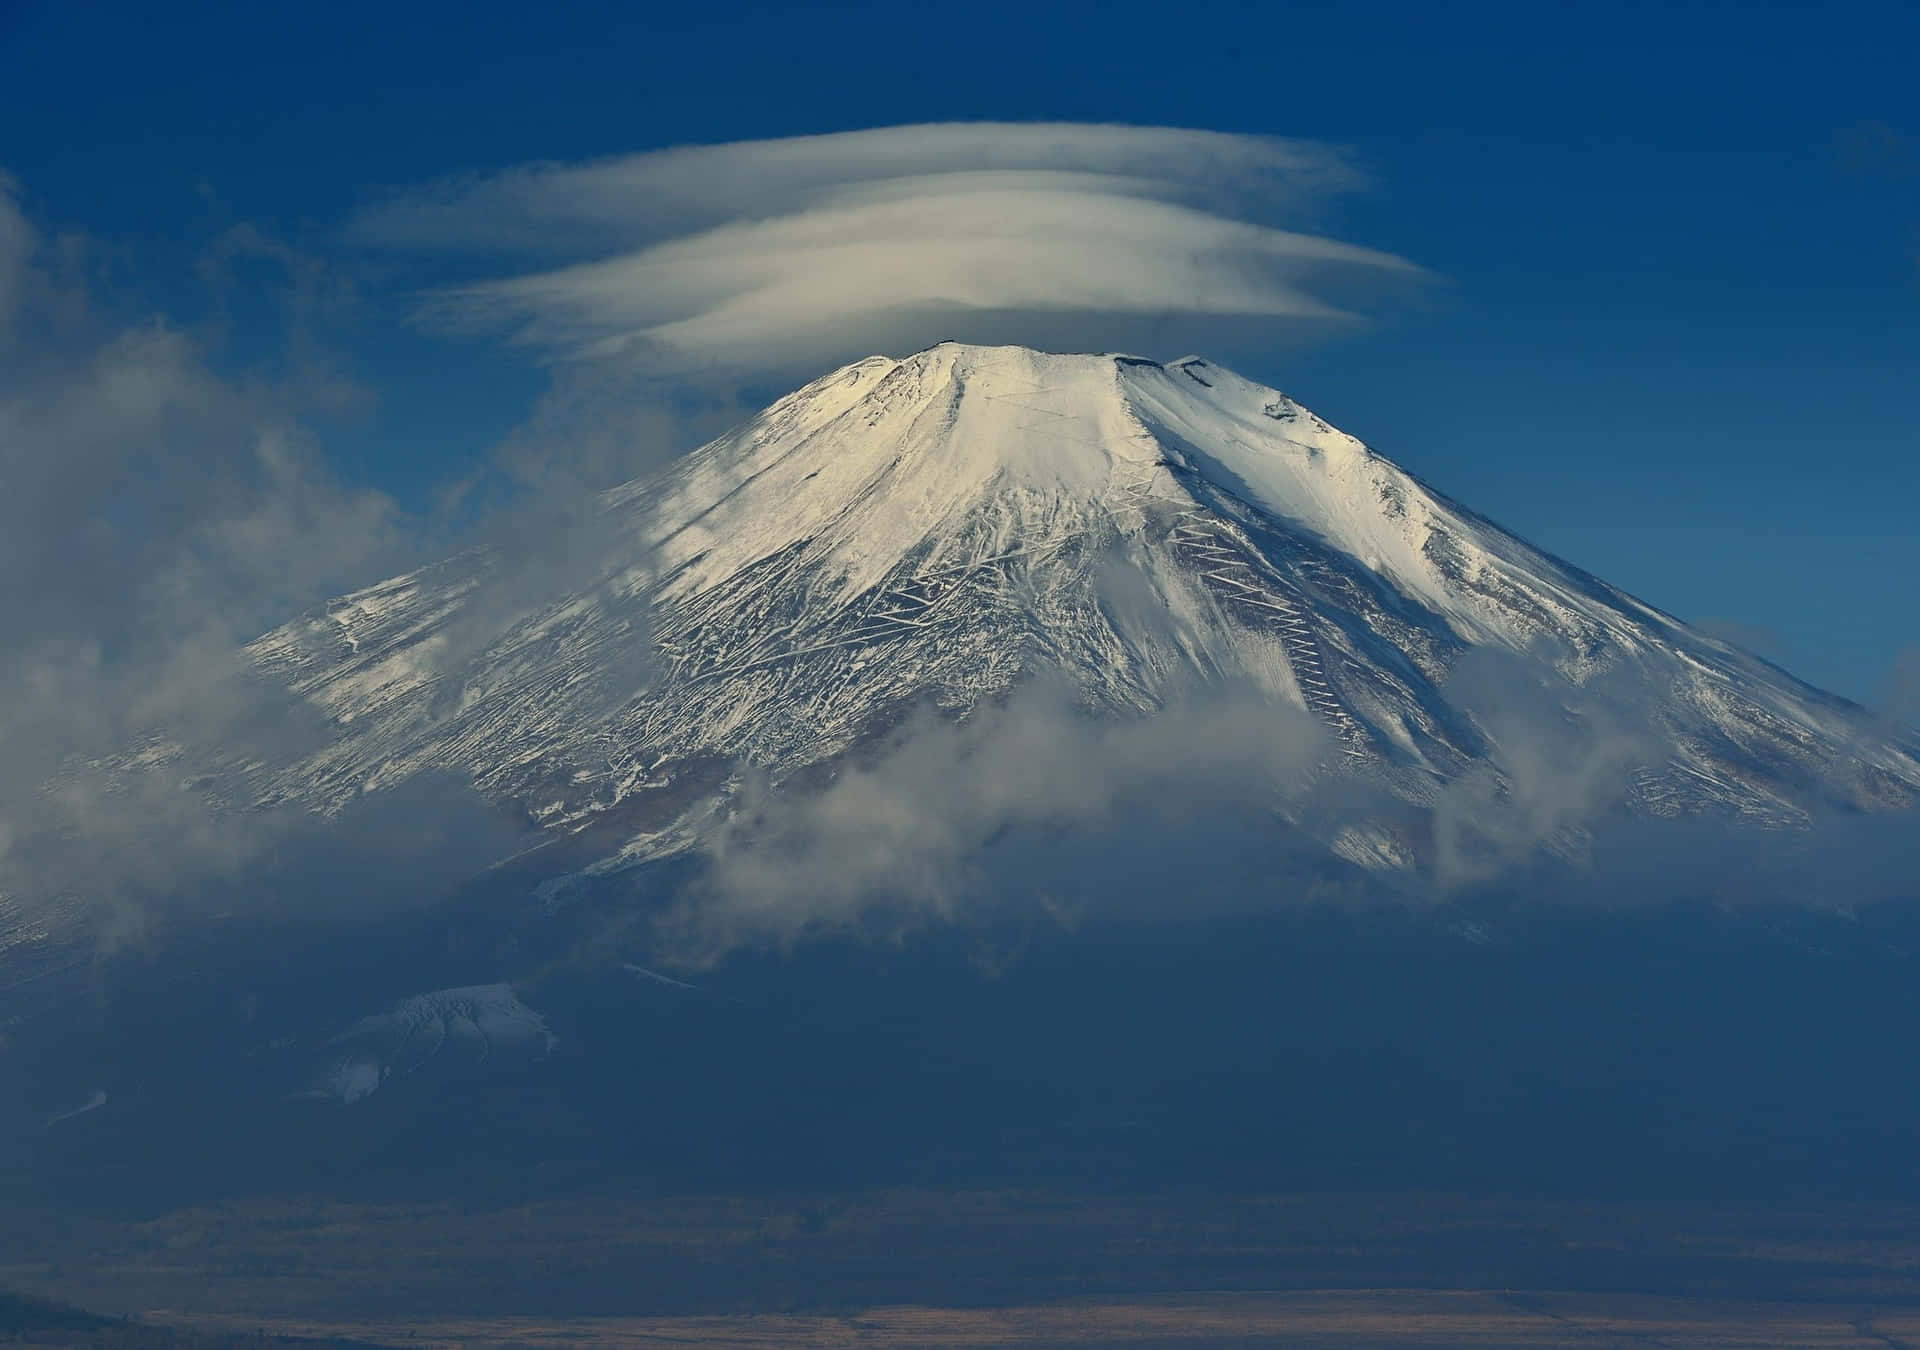 A Cloud Is Seen On Top Of A Mountain